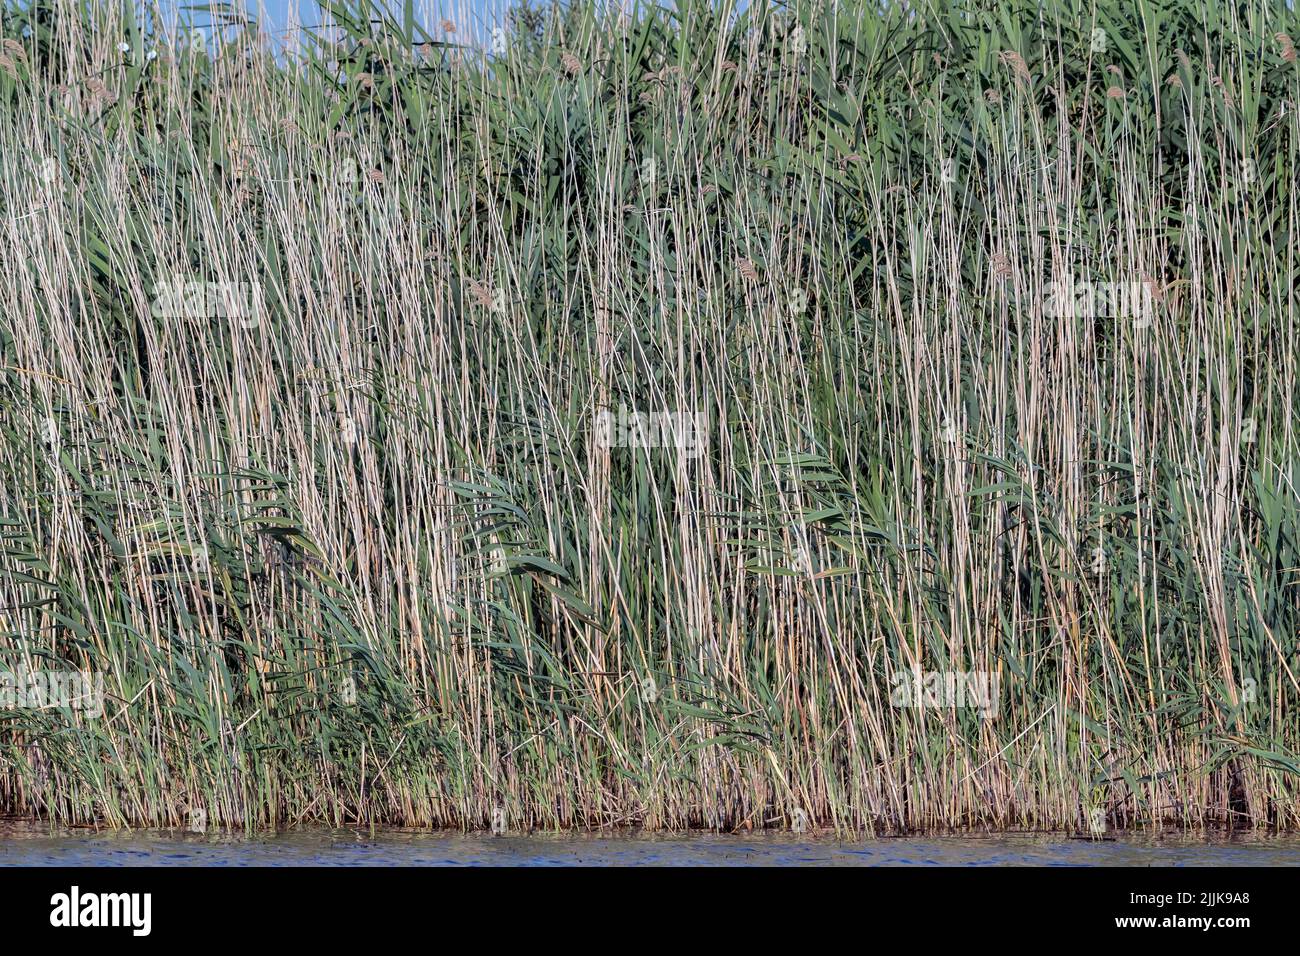 Bed of reeds. Romania Stock Photo